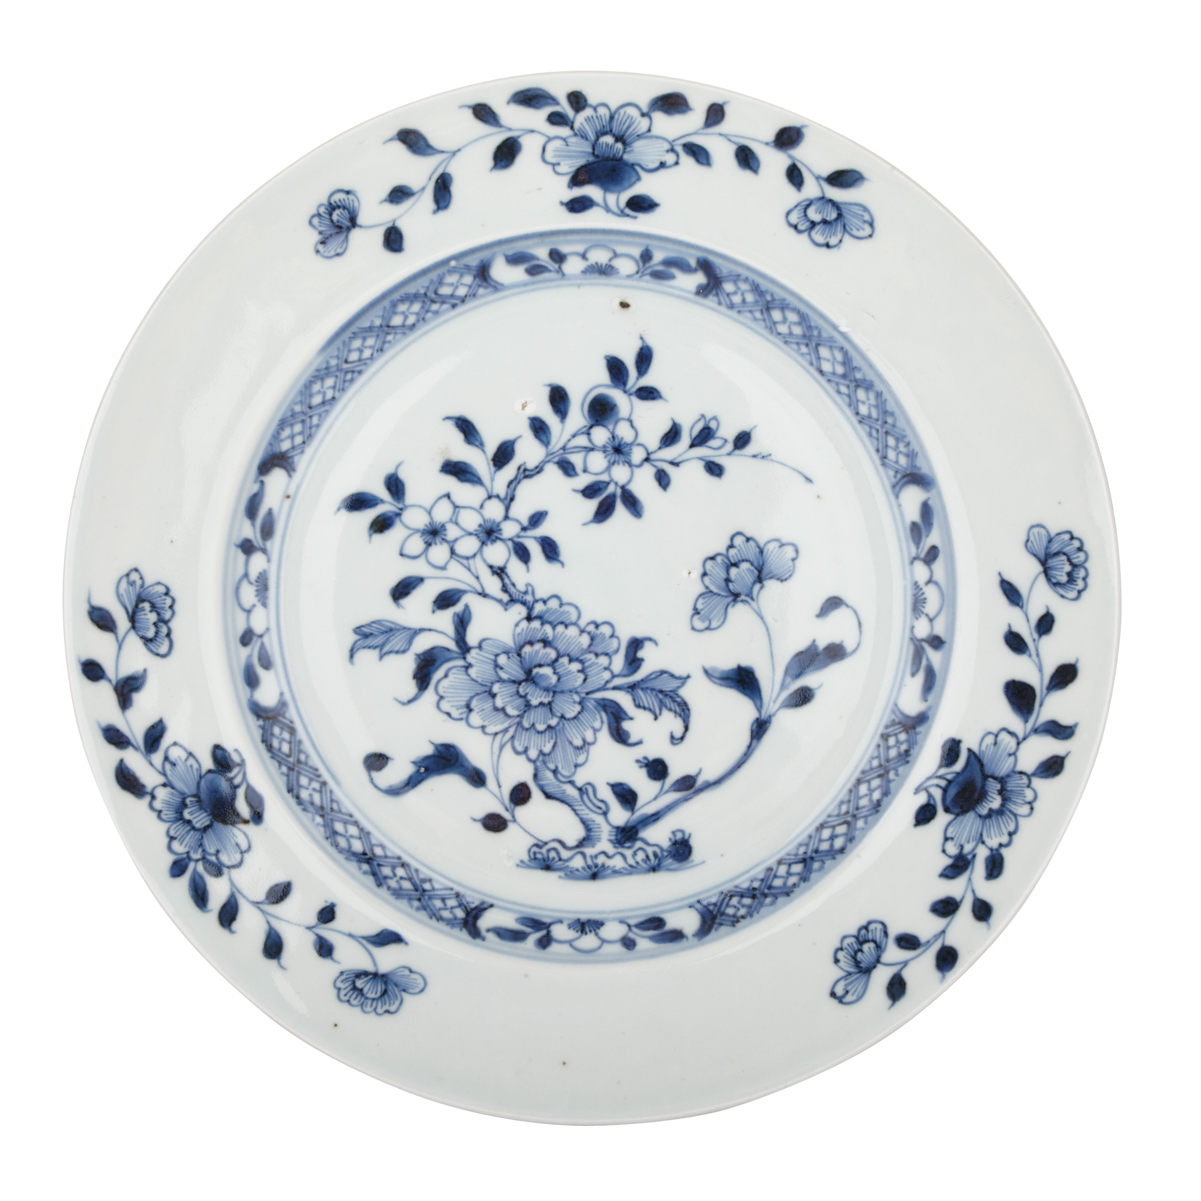 Nanking Cargo Blue and White Plate, Circa 1750